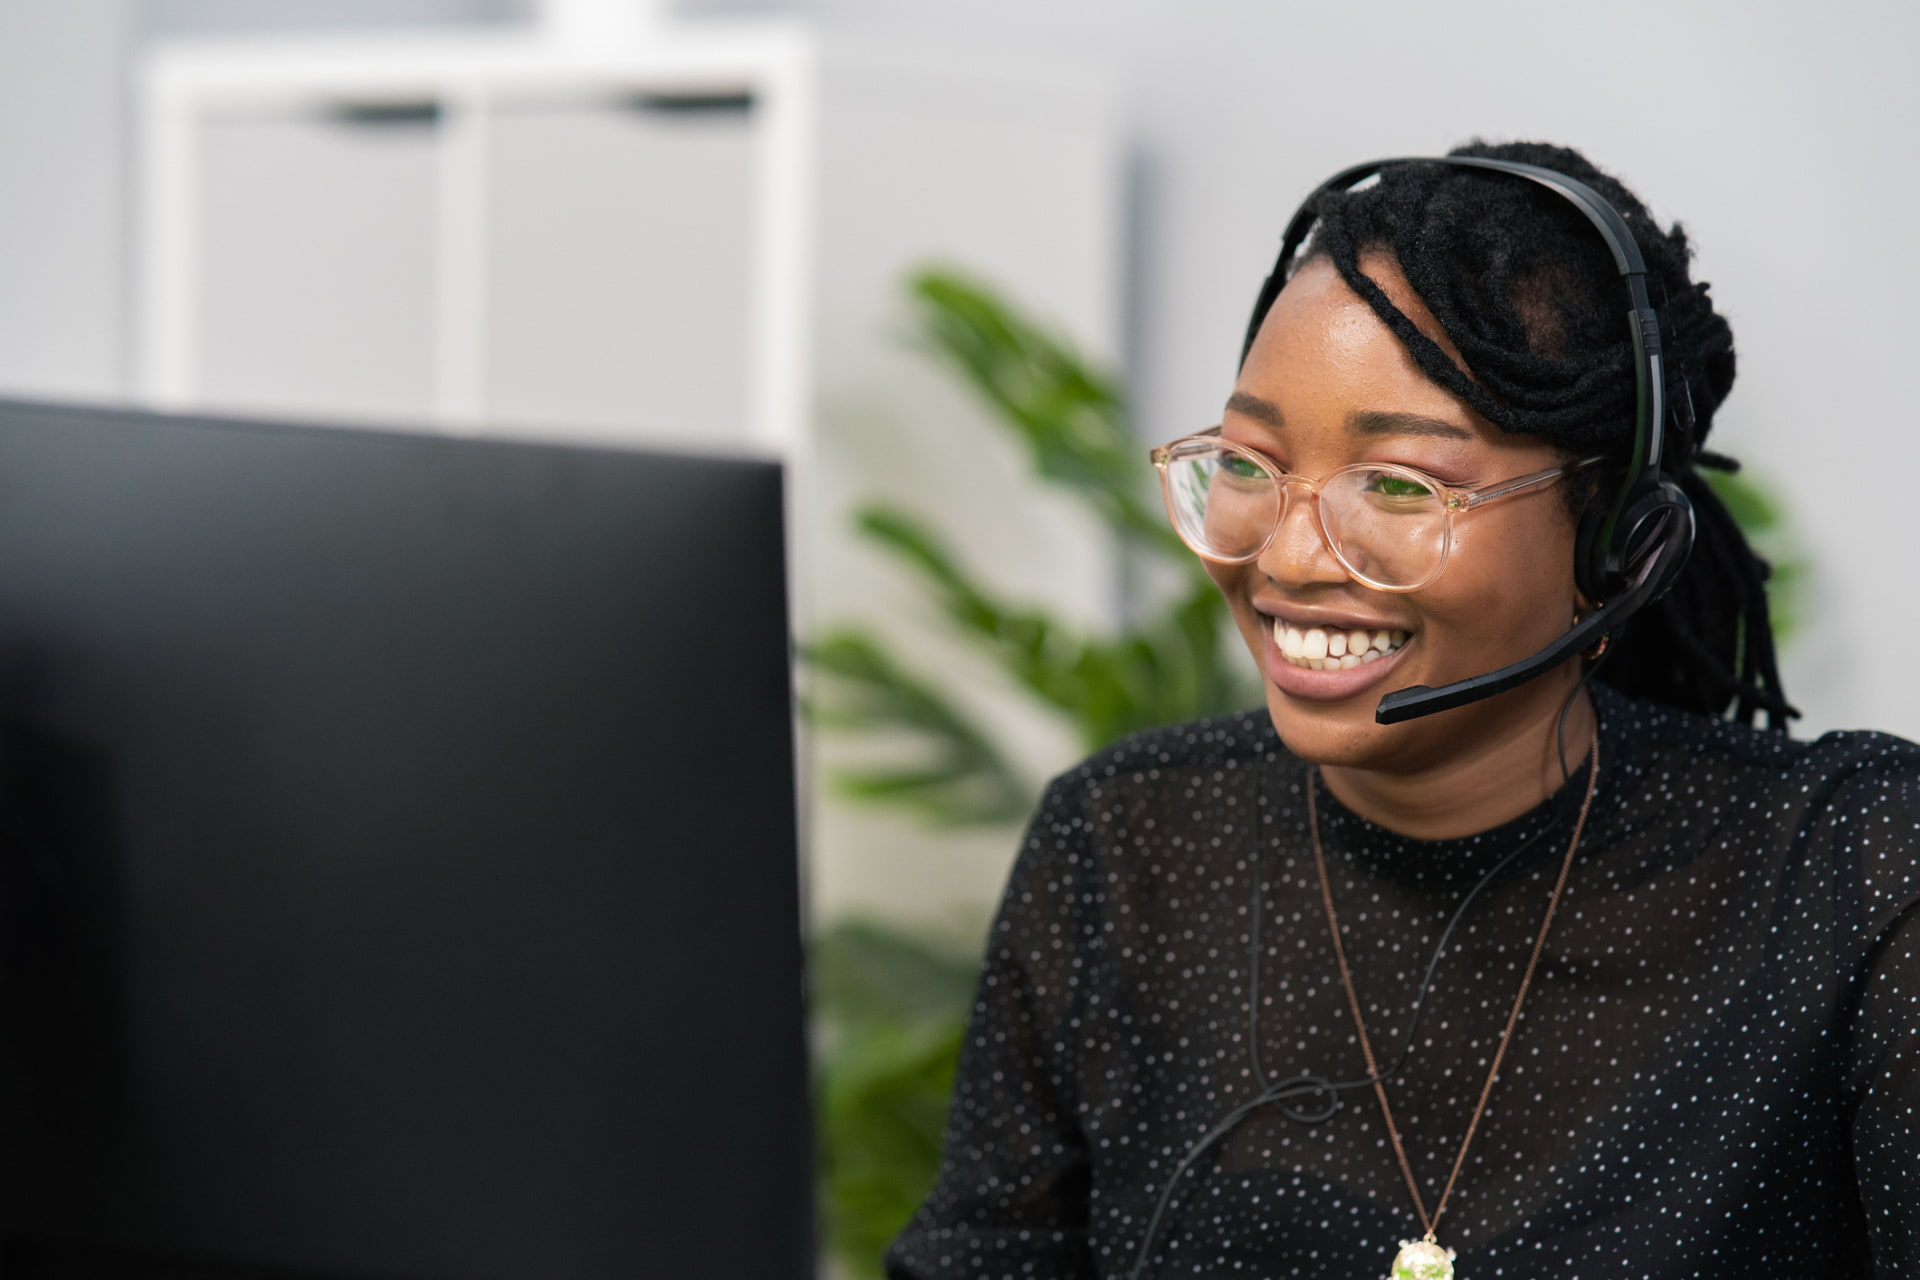 A woman smiling and wearing a headset in front of a computer.